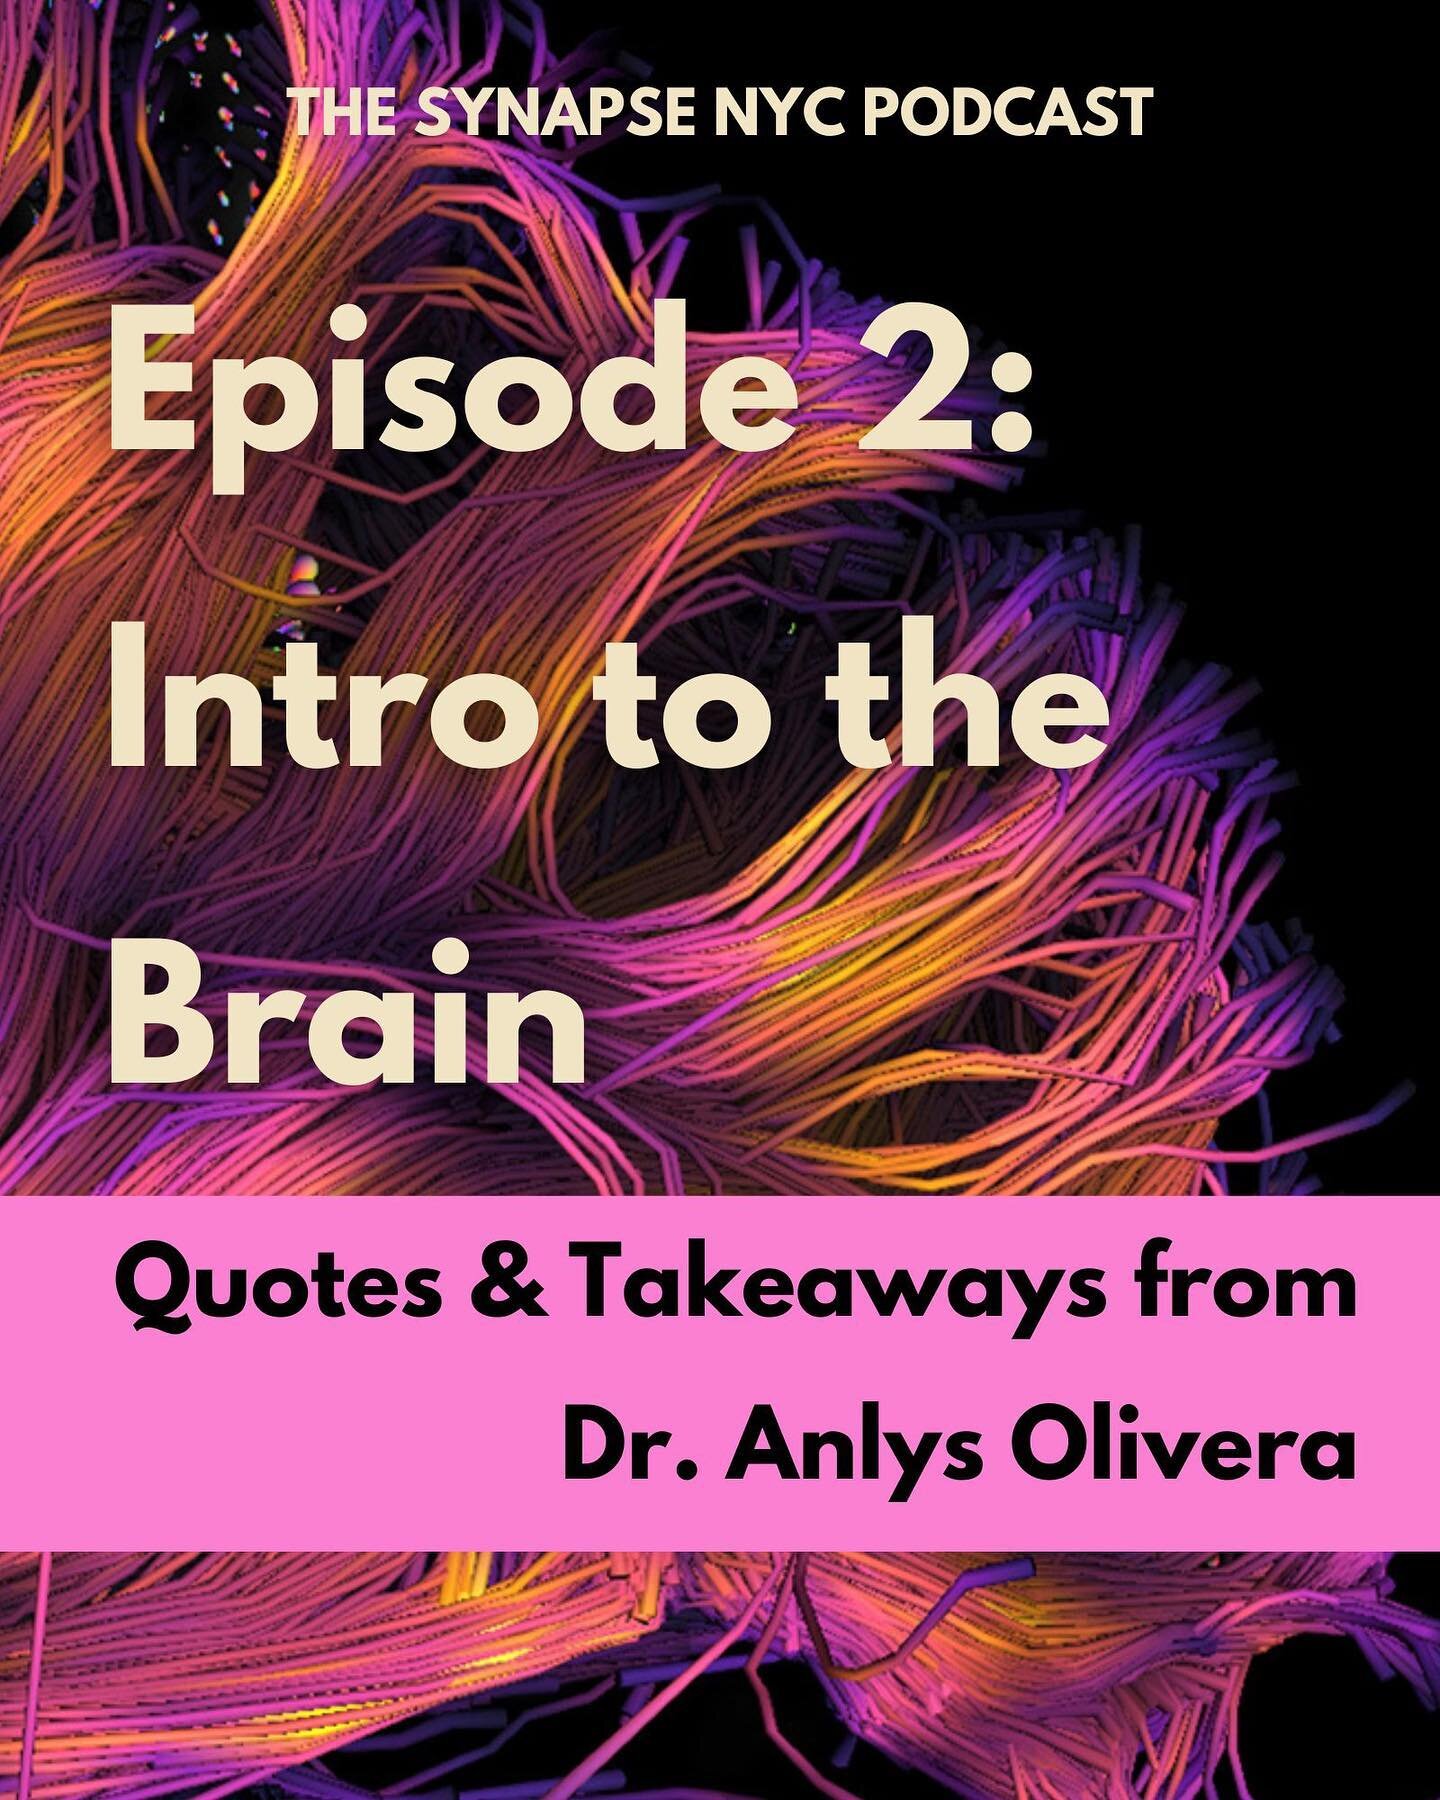 🧠THE SYNAPSE NYC PODCAST - EPISODE #2 / INTRO TO THE BRAIN🧠
Have you listened to our second episode yet? In this episode, we host Dr. Anlys Olivera from Columbia University for a conversation on the brain, the body, and how they interact. 
This epi